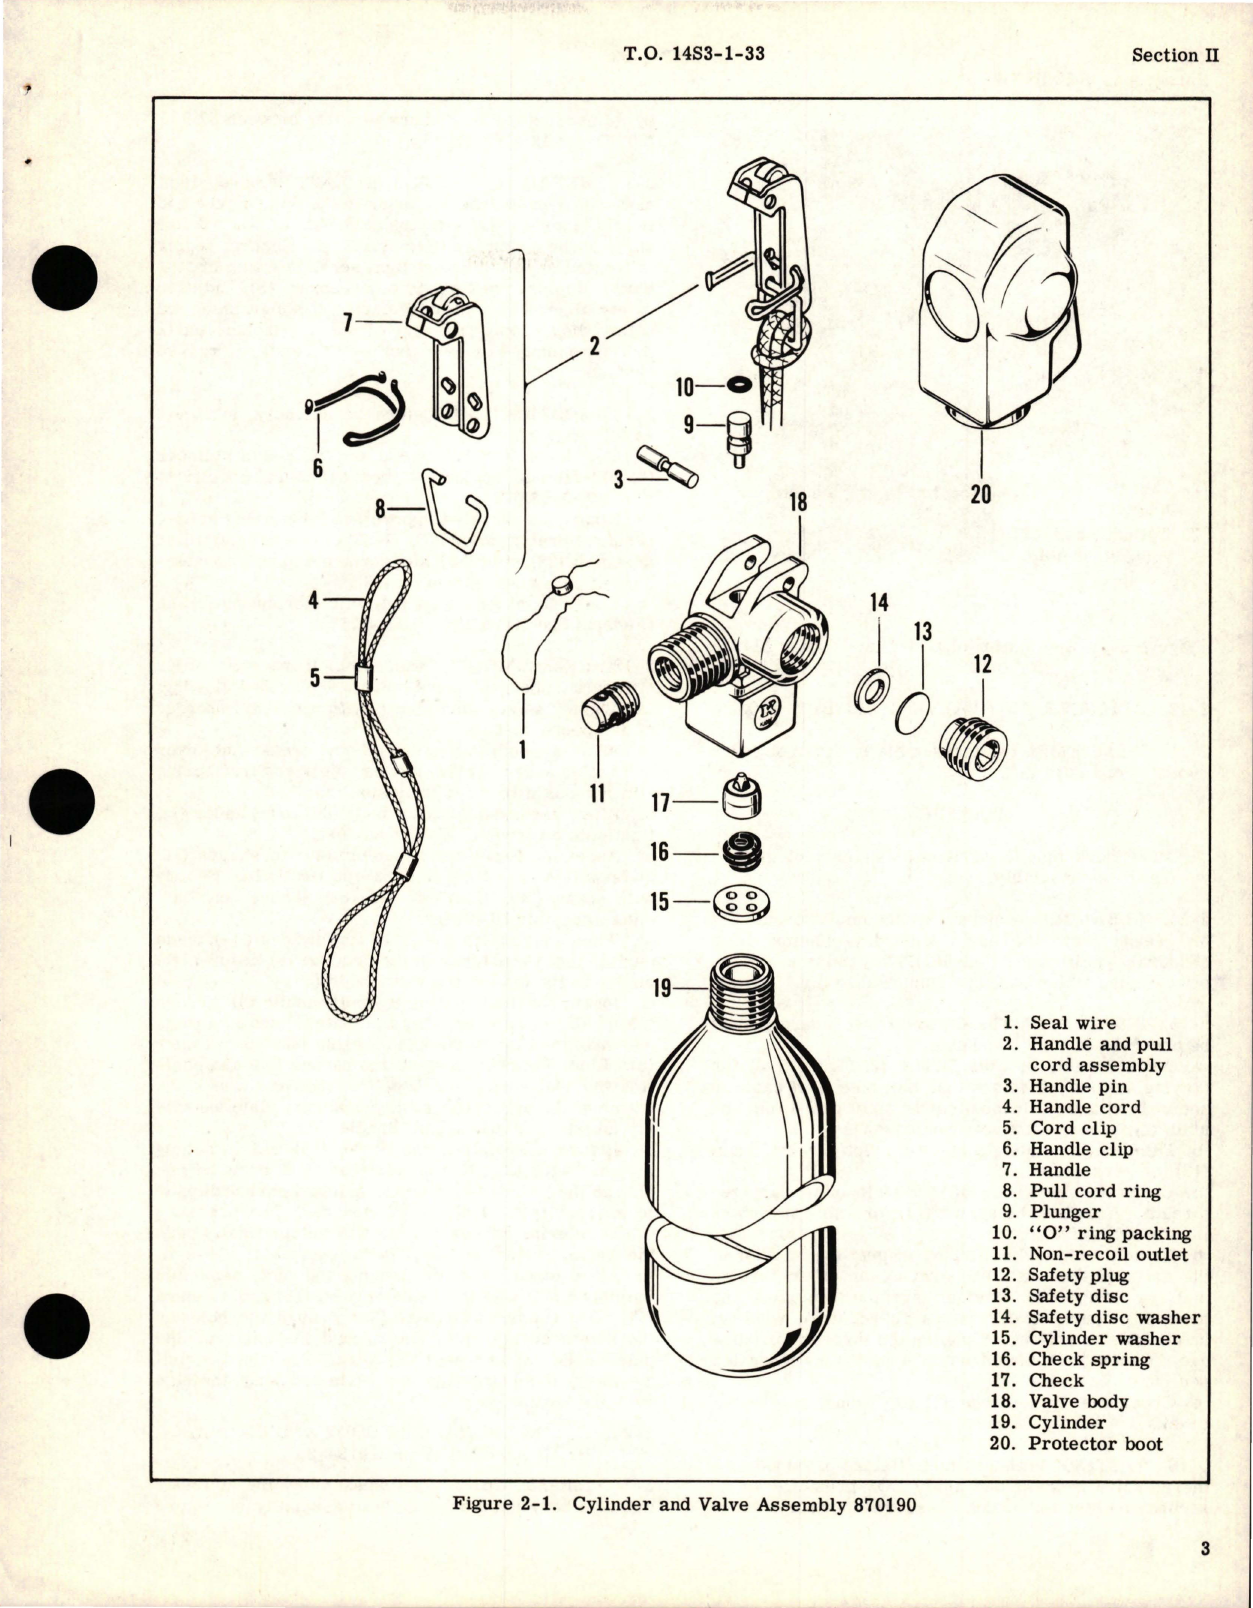 Sample page 7 from AirCorps Library document: Overhaul Instructions for Life Raft Inflation Equipment